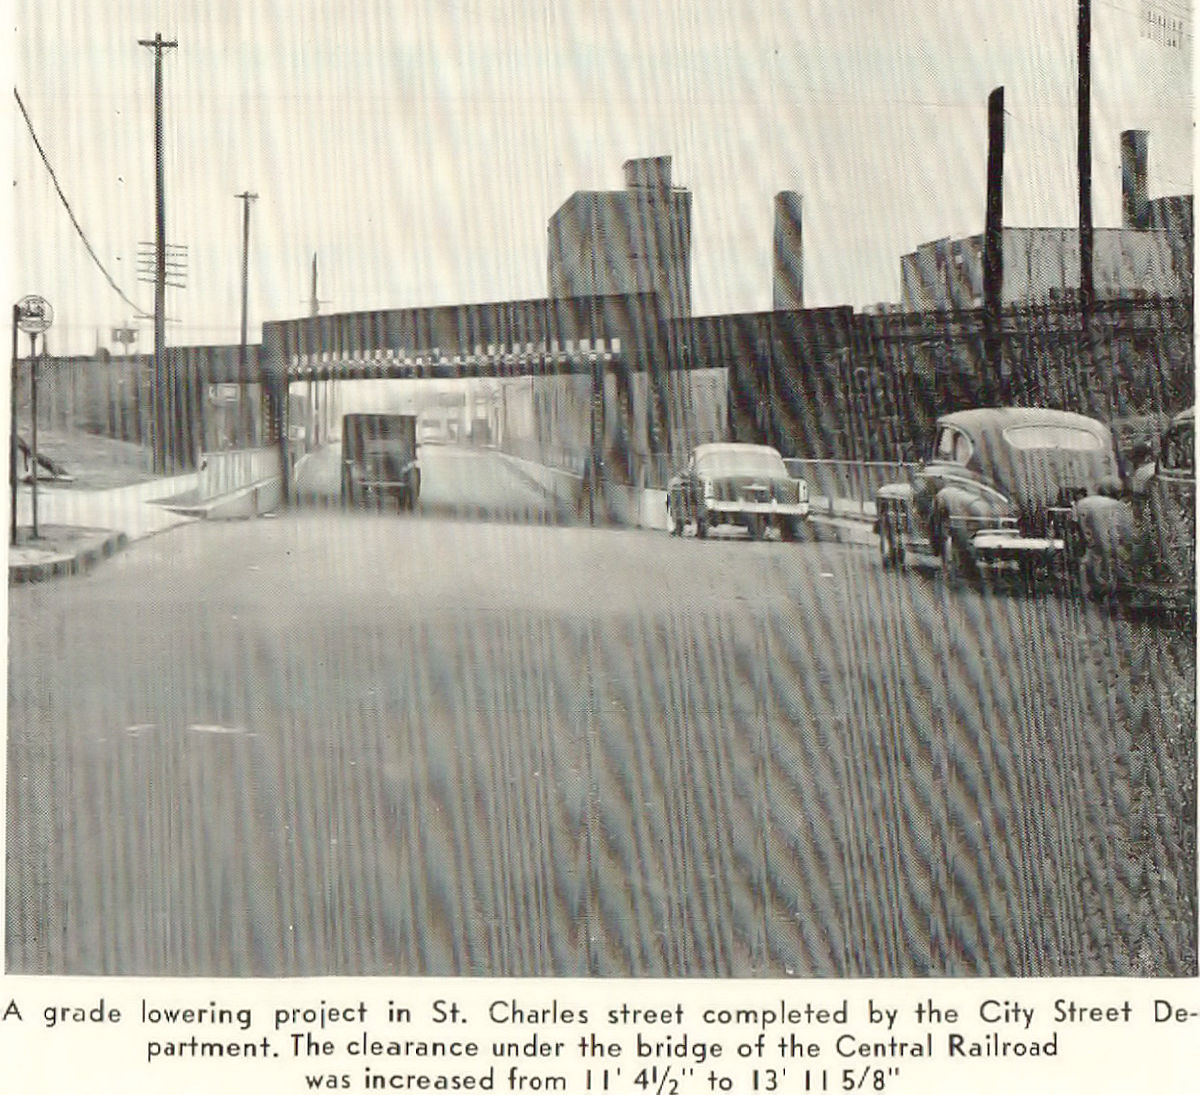 St. Charles Street at the NJ Central Railroad Tracks
Corner of Ferry Street
Photo from the Newark Municipal Yearbook 1953
